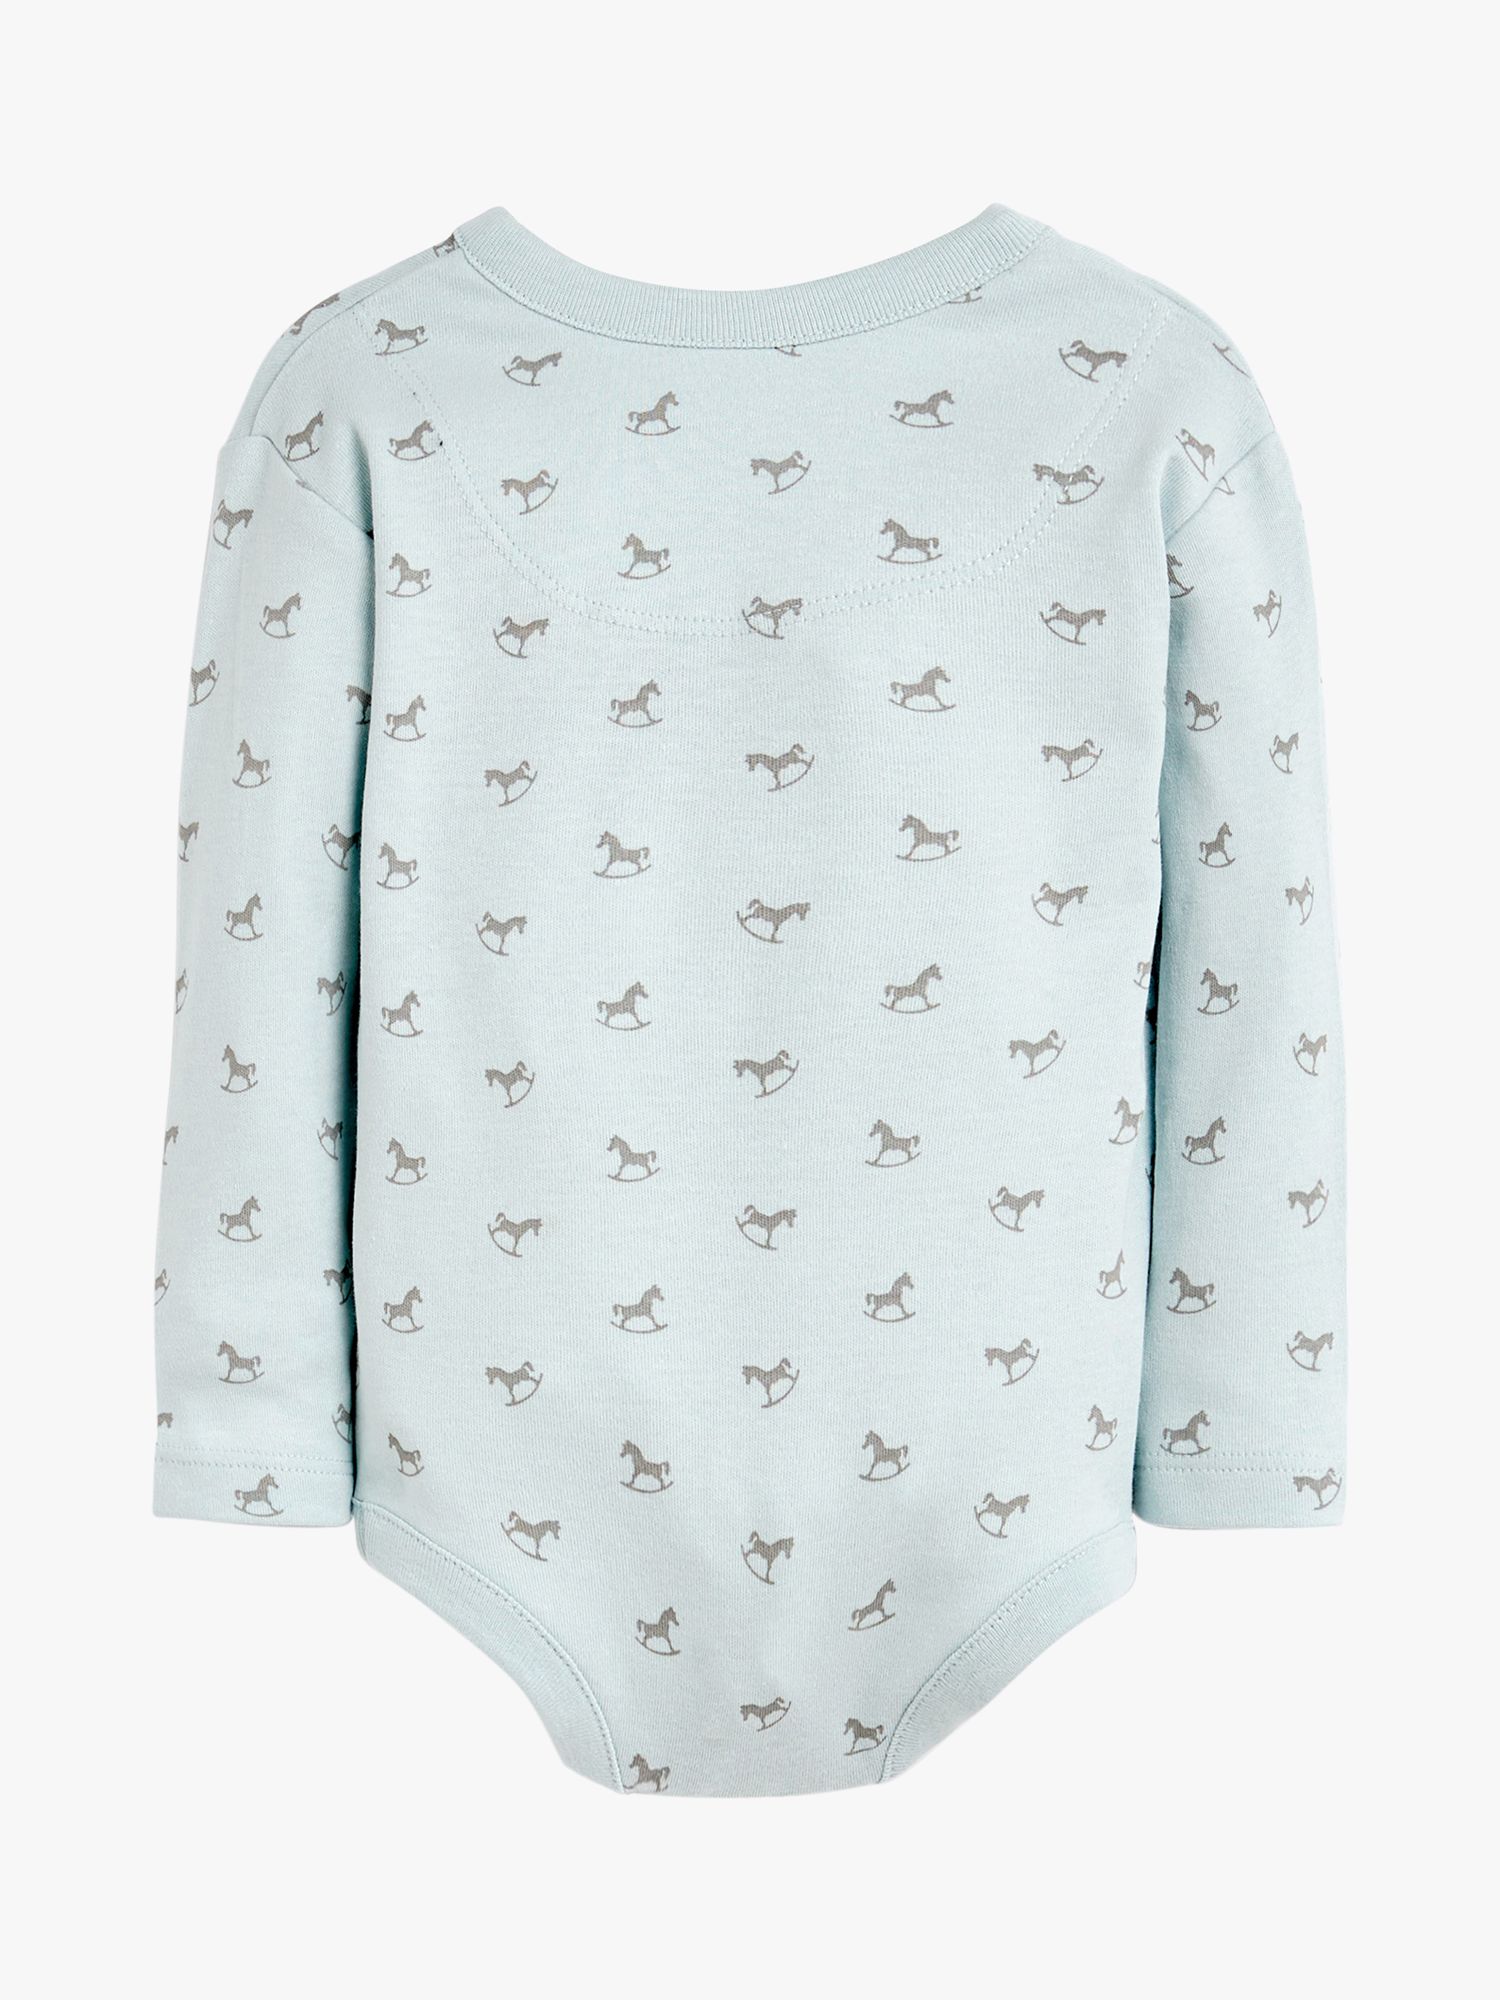 The Little Tailor Baby Rocking Horse Print Long Sleeve Bodysuit, Pack of 2, Blue/White, 0-3 months